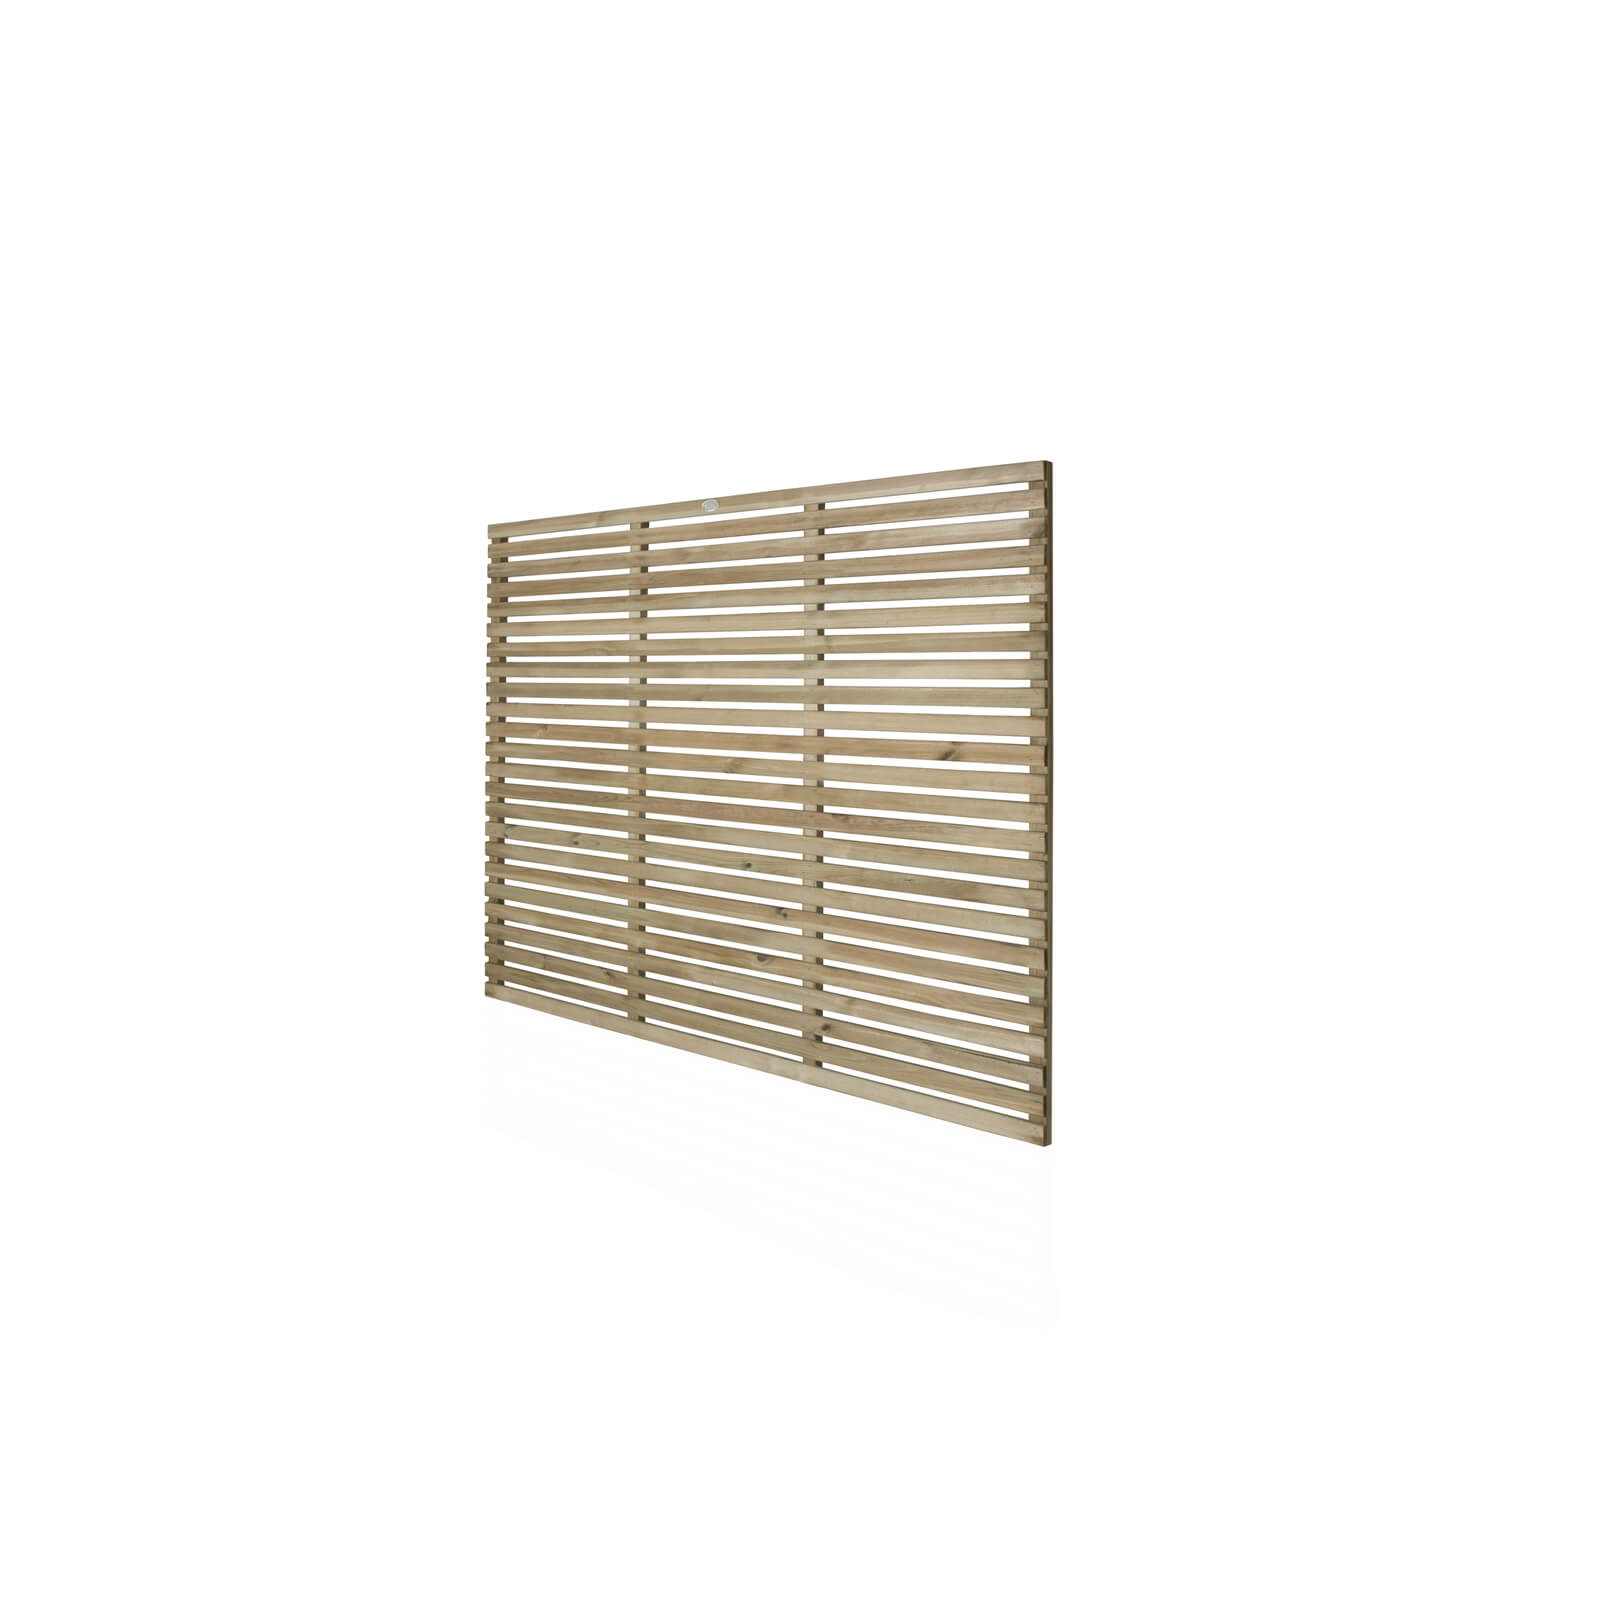 6ft x 5ft (1.8m x 1.5m) Pressure Treated Contemporary Slatted Fence Panel - Pack of 3